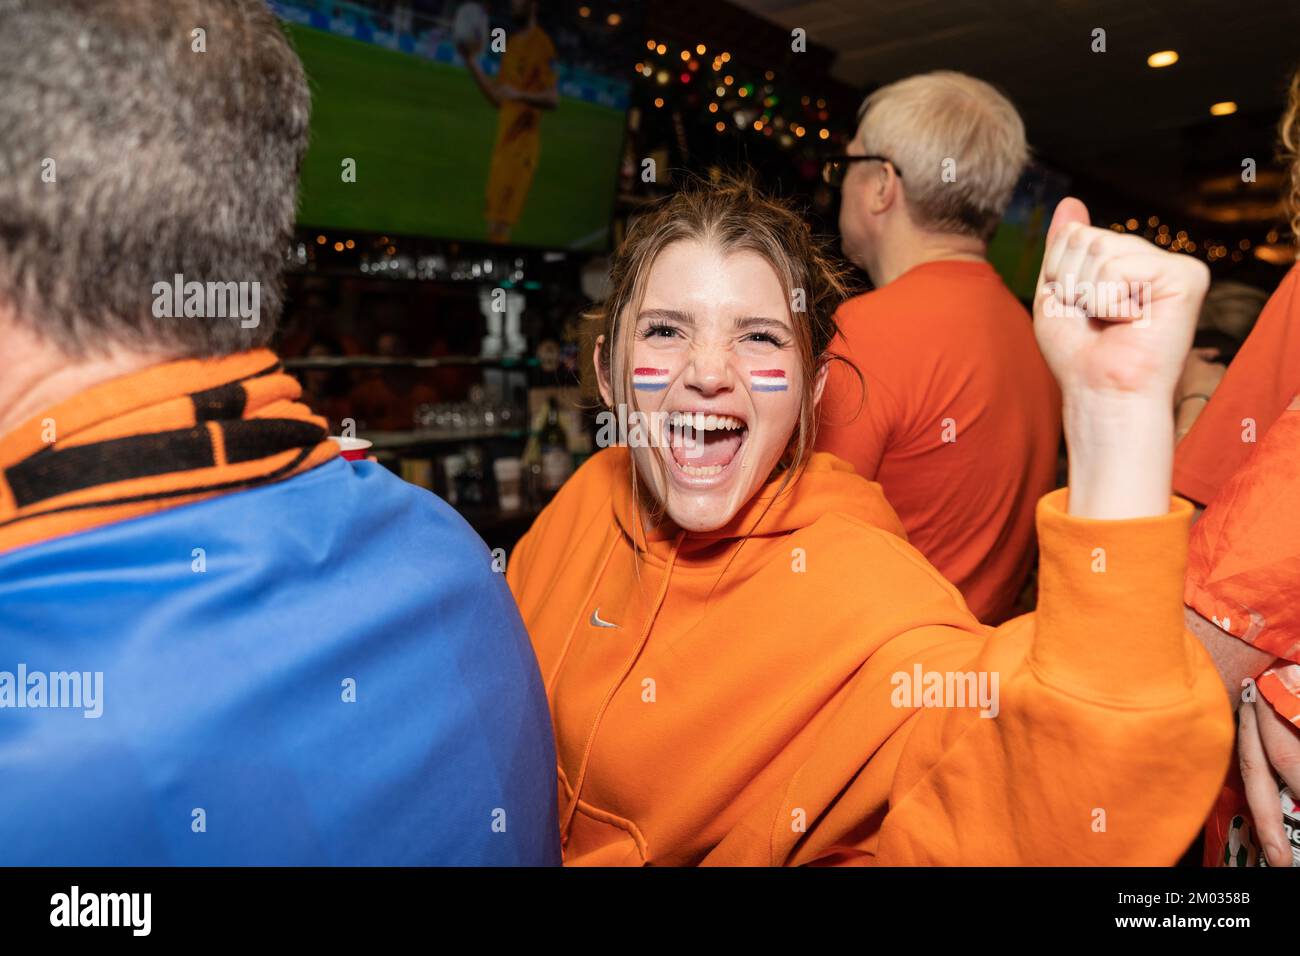 Fans of The Netherlands football team reacting and drinking during the game against USA at Qatar World Cup at Hurley's Saloon in New York on December 3, 2022 Stock Photo